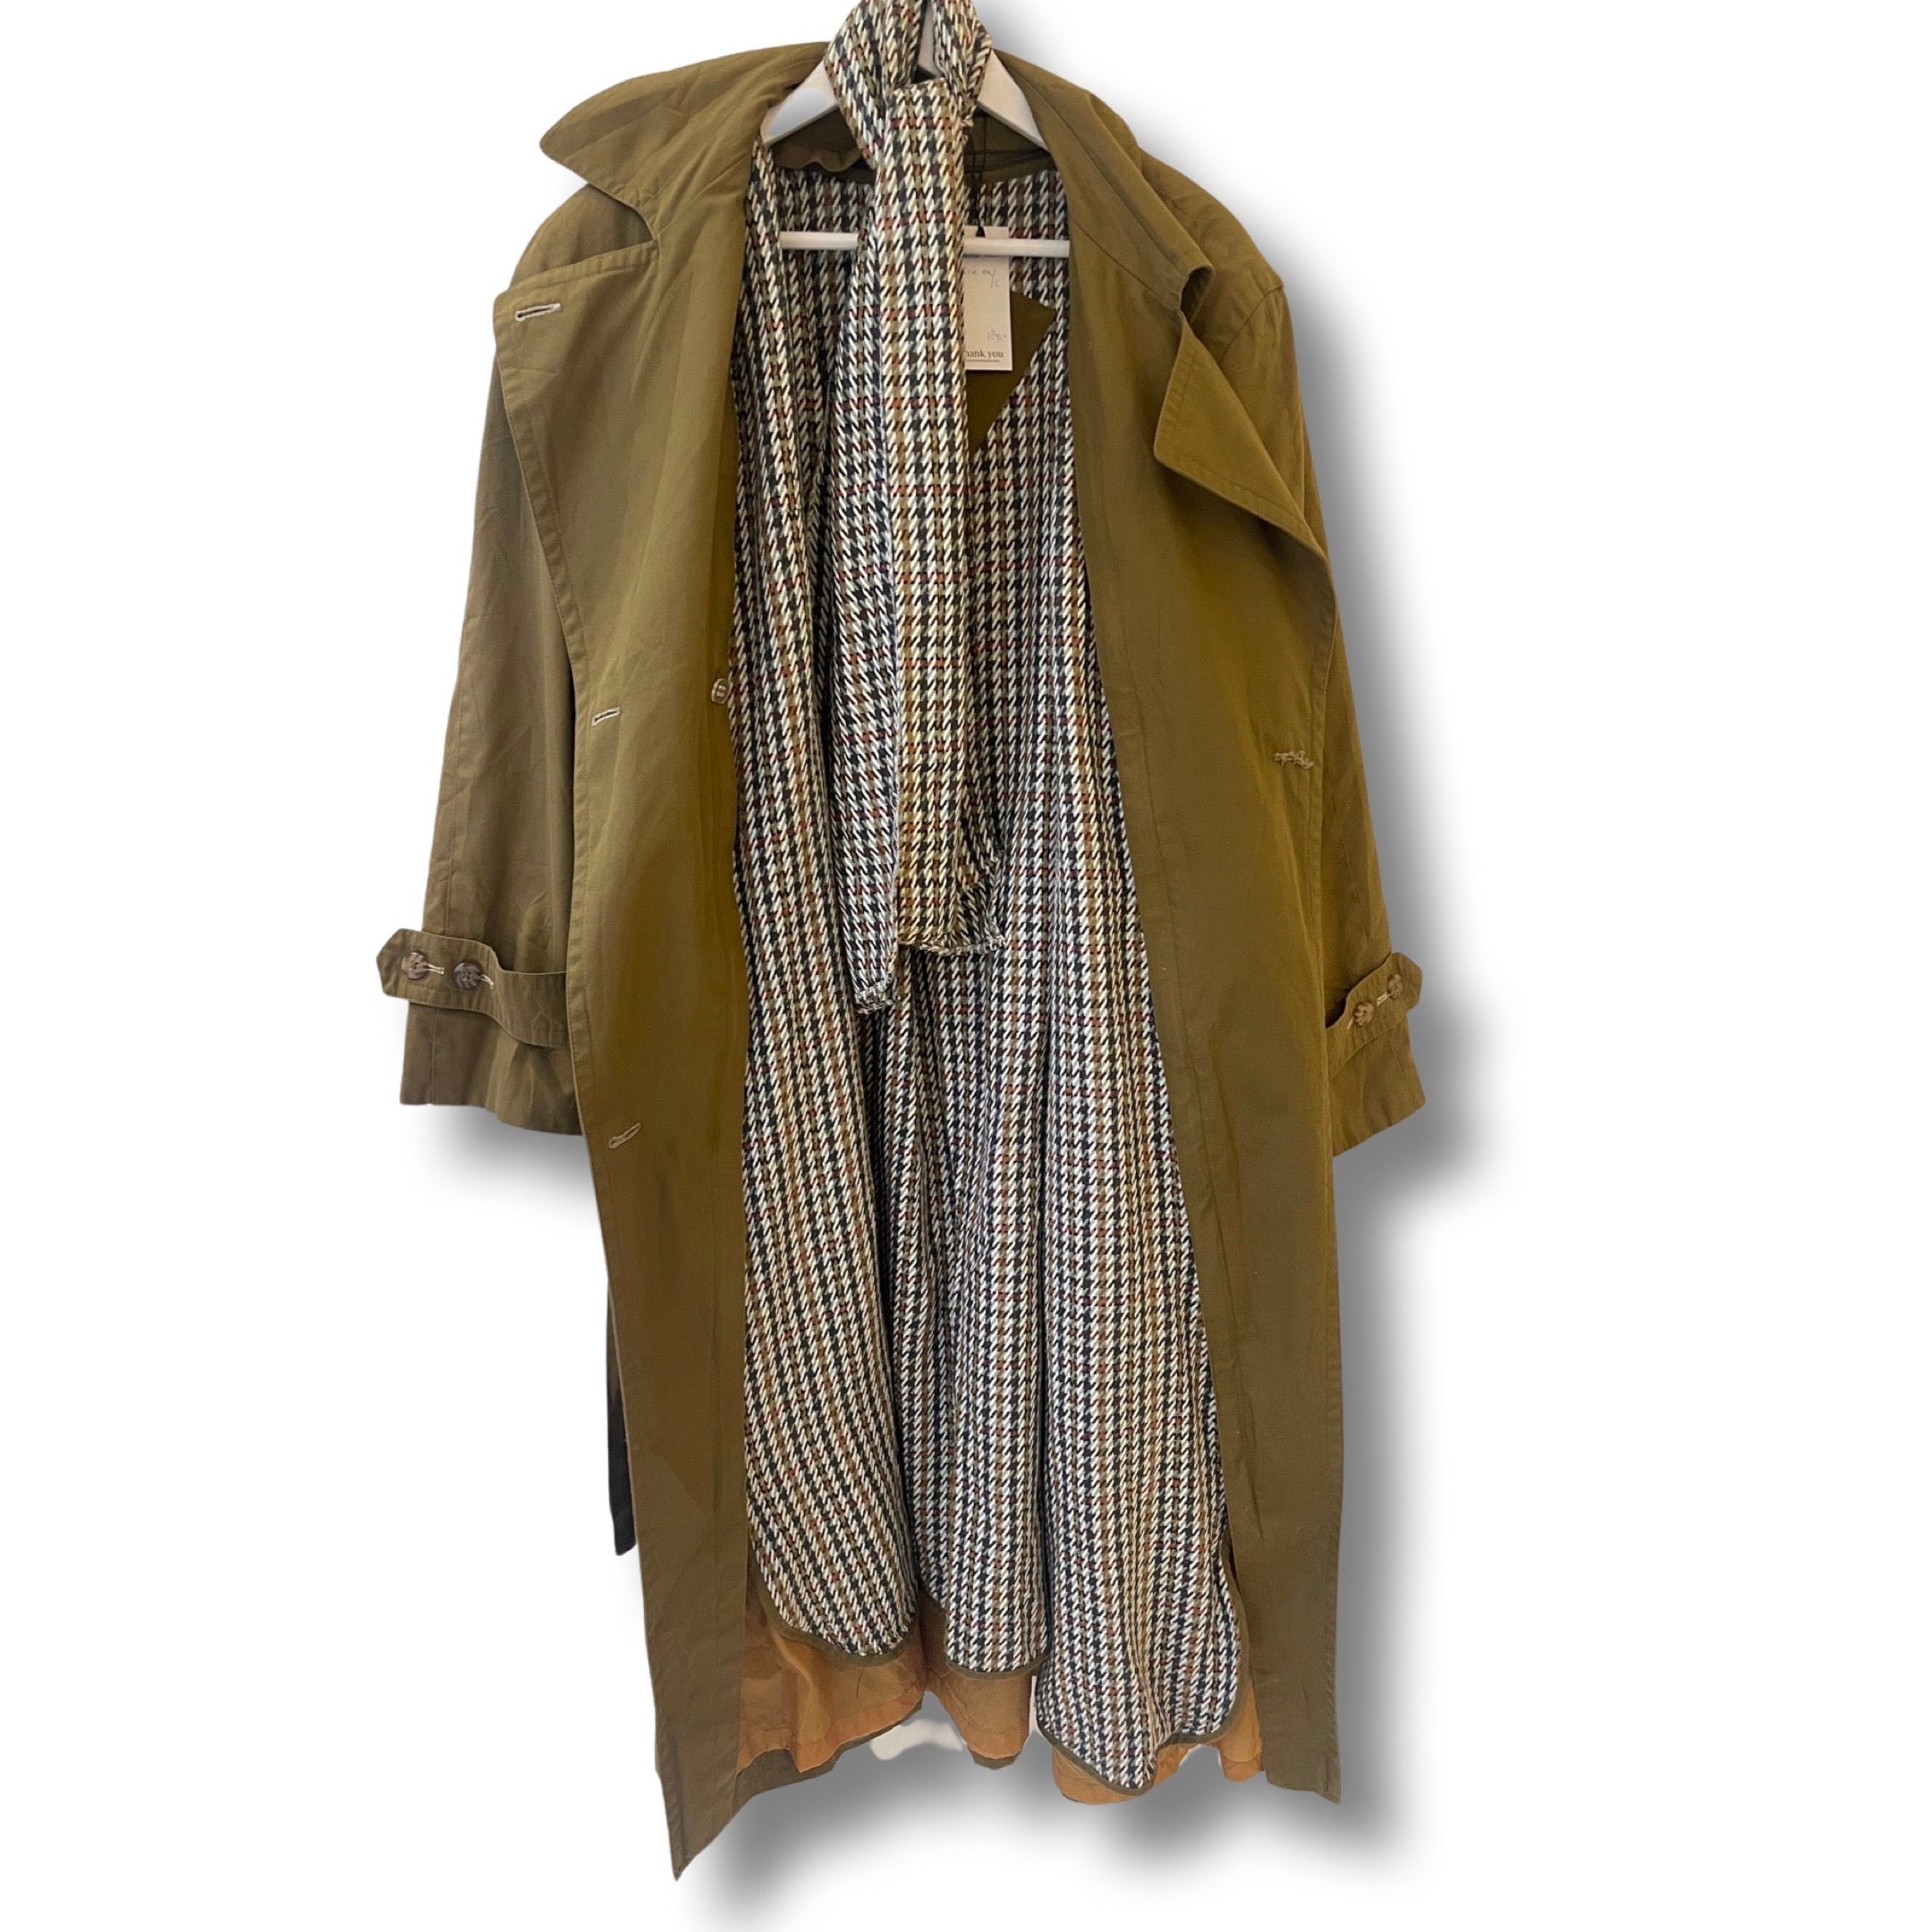 Olive lined trench coat.